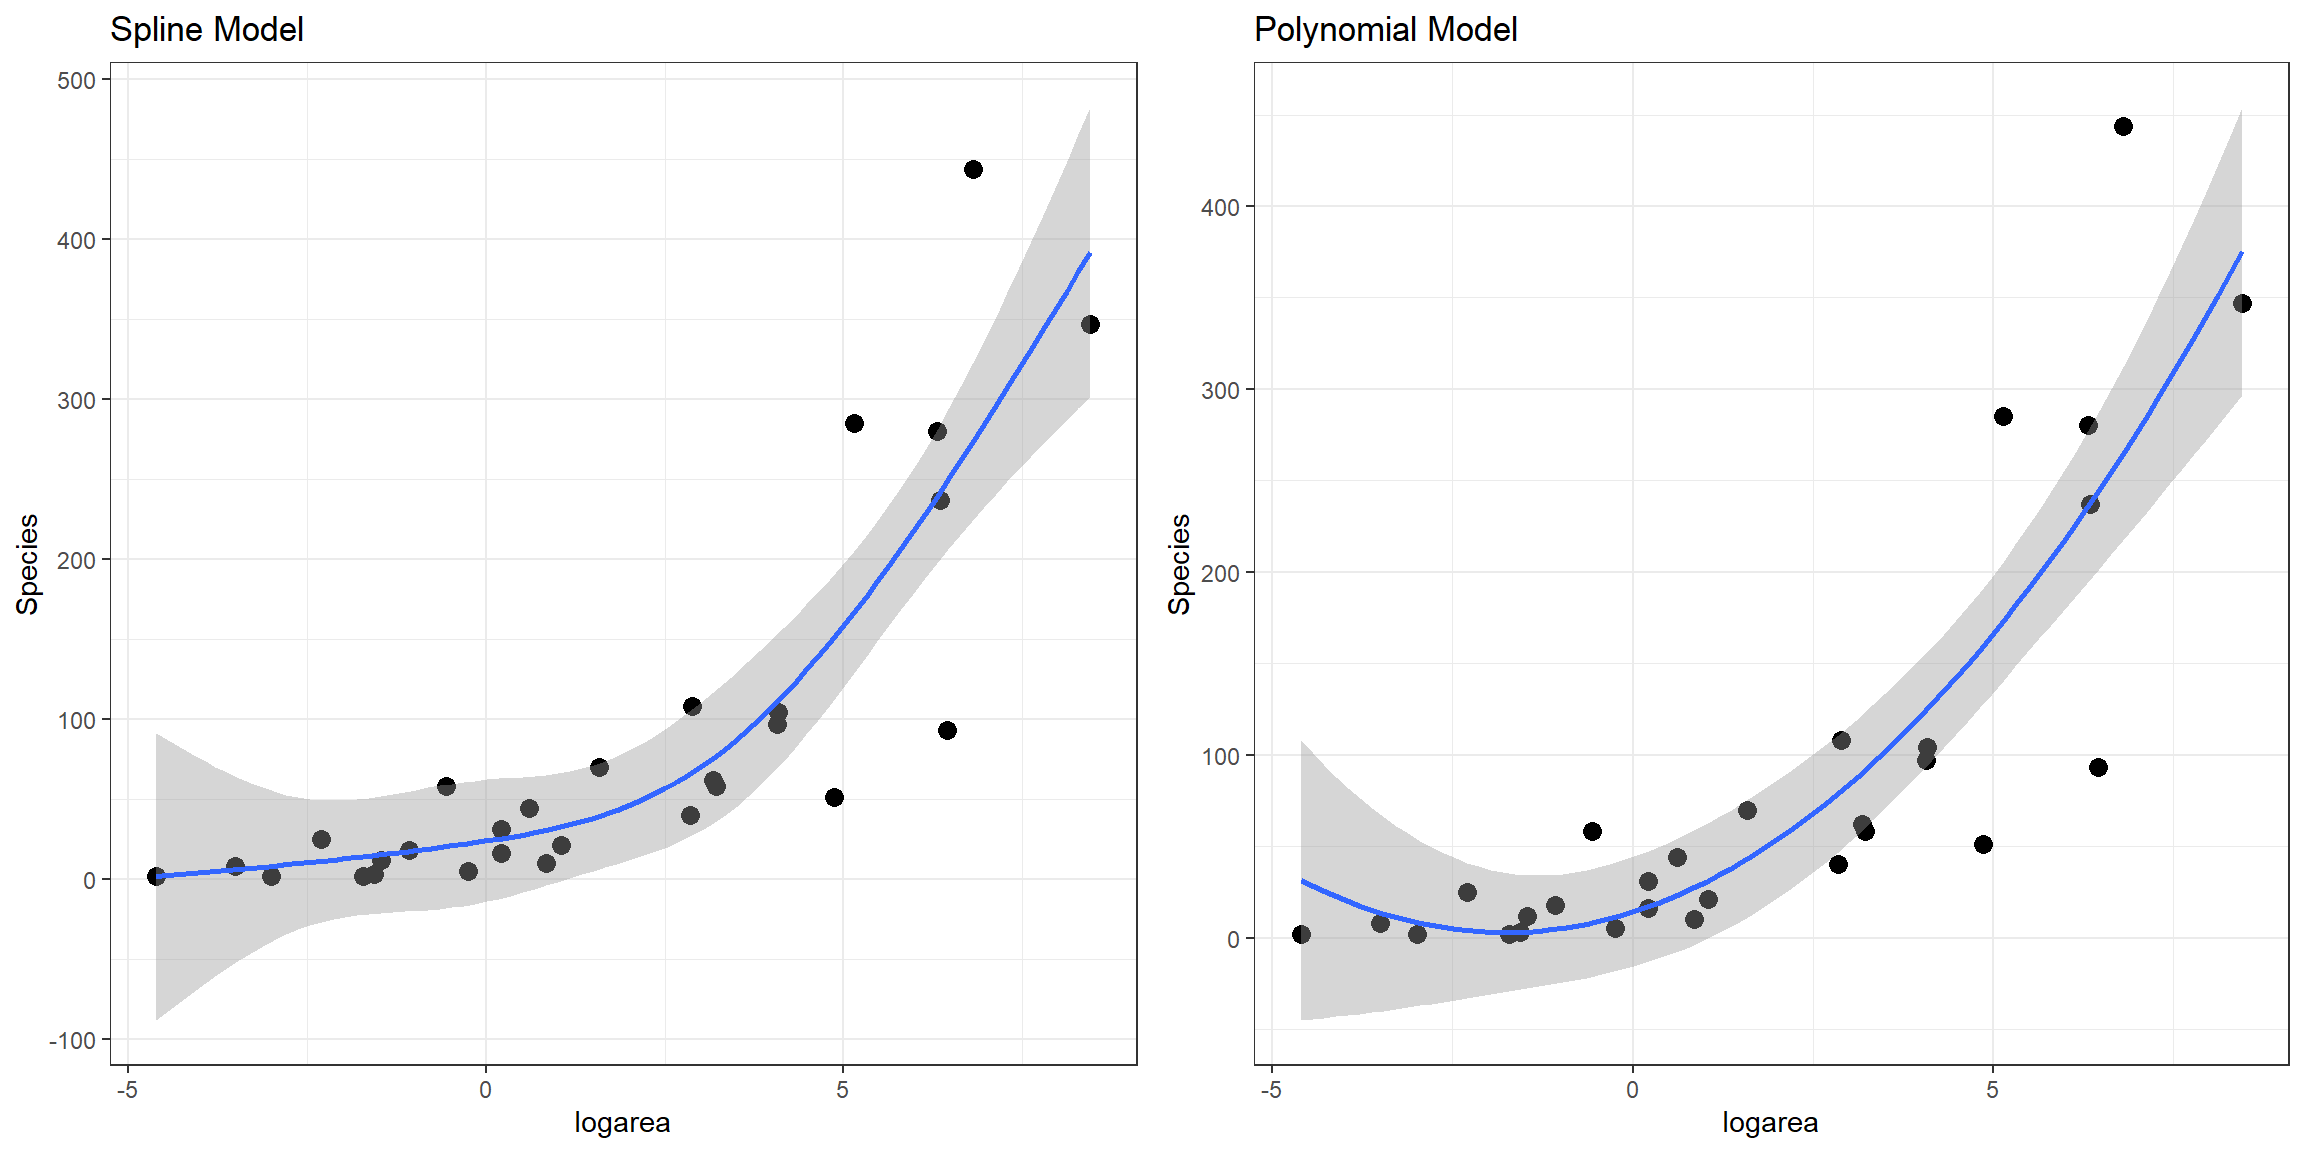 Comparison of predicted values from the natural cubic regression spline and polynomial models fit to plant species richness data collected from 29 islands in the Galapagos Islands archipelago. Data are from M. P. Johnson & Raven (1973).